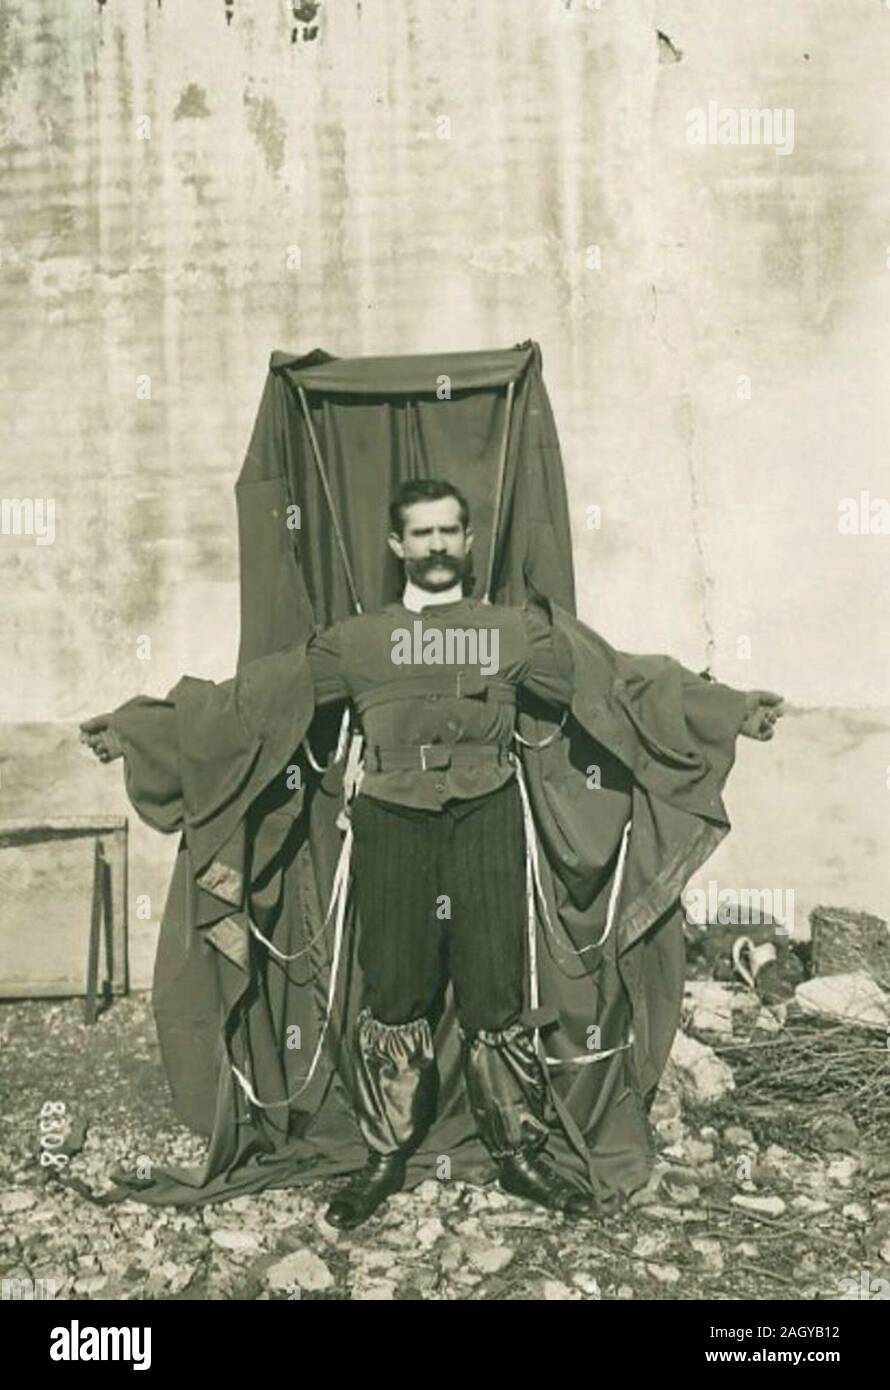 Franz Reichelt (1878 – 1912), Frantz Reichelt or François Reichelt, an Austrian-born French inventor and parachuting pioneer, now sometimes referred to as the Flying Tailor, who is remembered for jumping to his death from the Eiffel Tower while testing a wearable parachute of his own design. Stock Photo